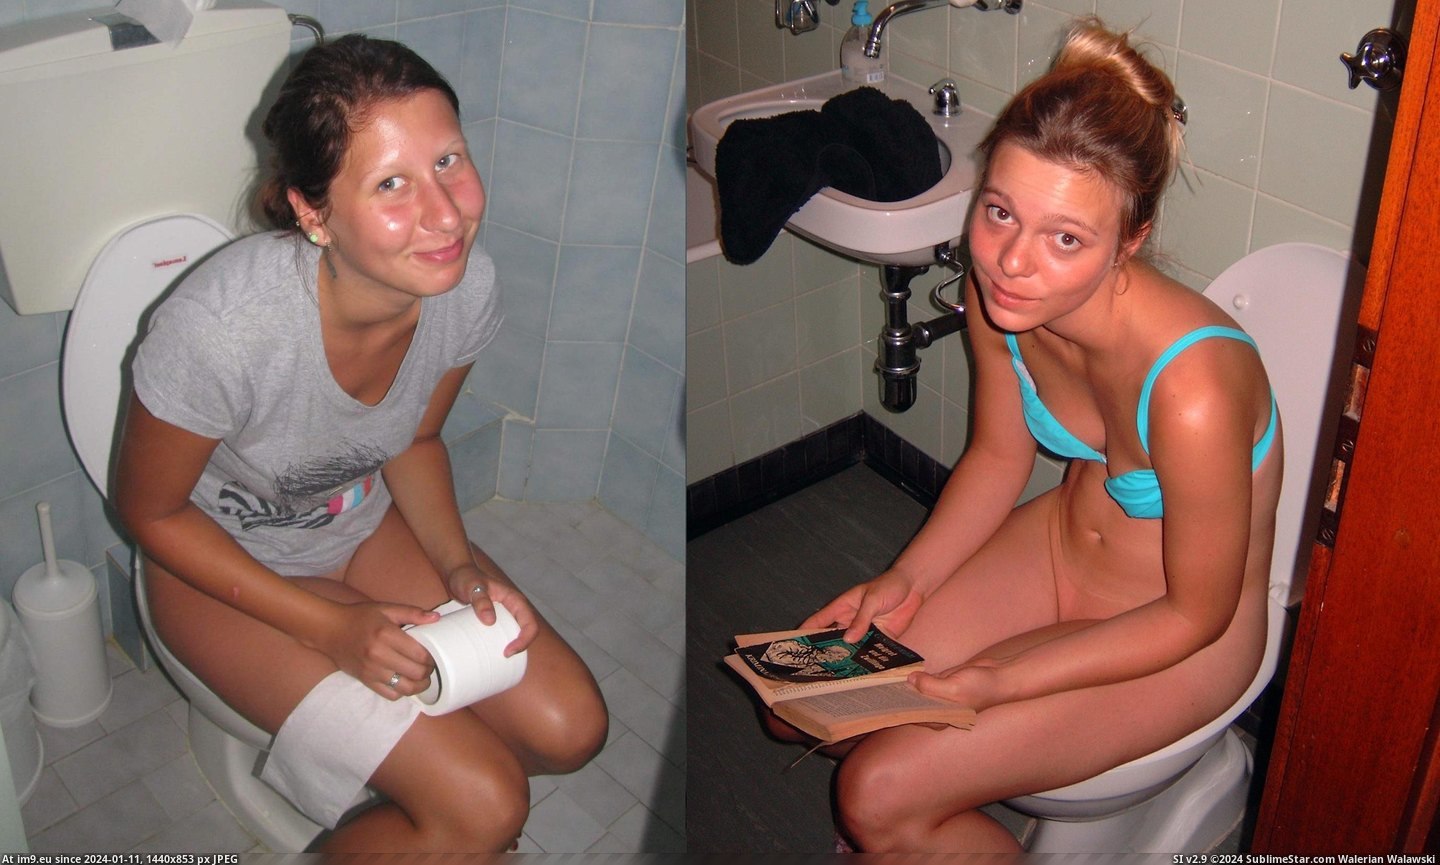 #Hot #Young #Babe #Pose #Alike #Embarassed #Pissing #Bitch #Bath Pose-alike (6) Pic. (Image of album lookalike teens))